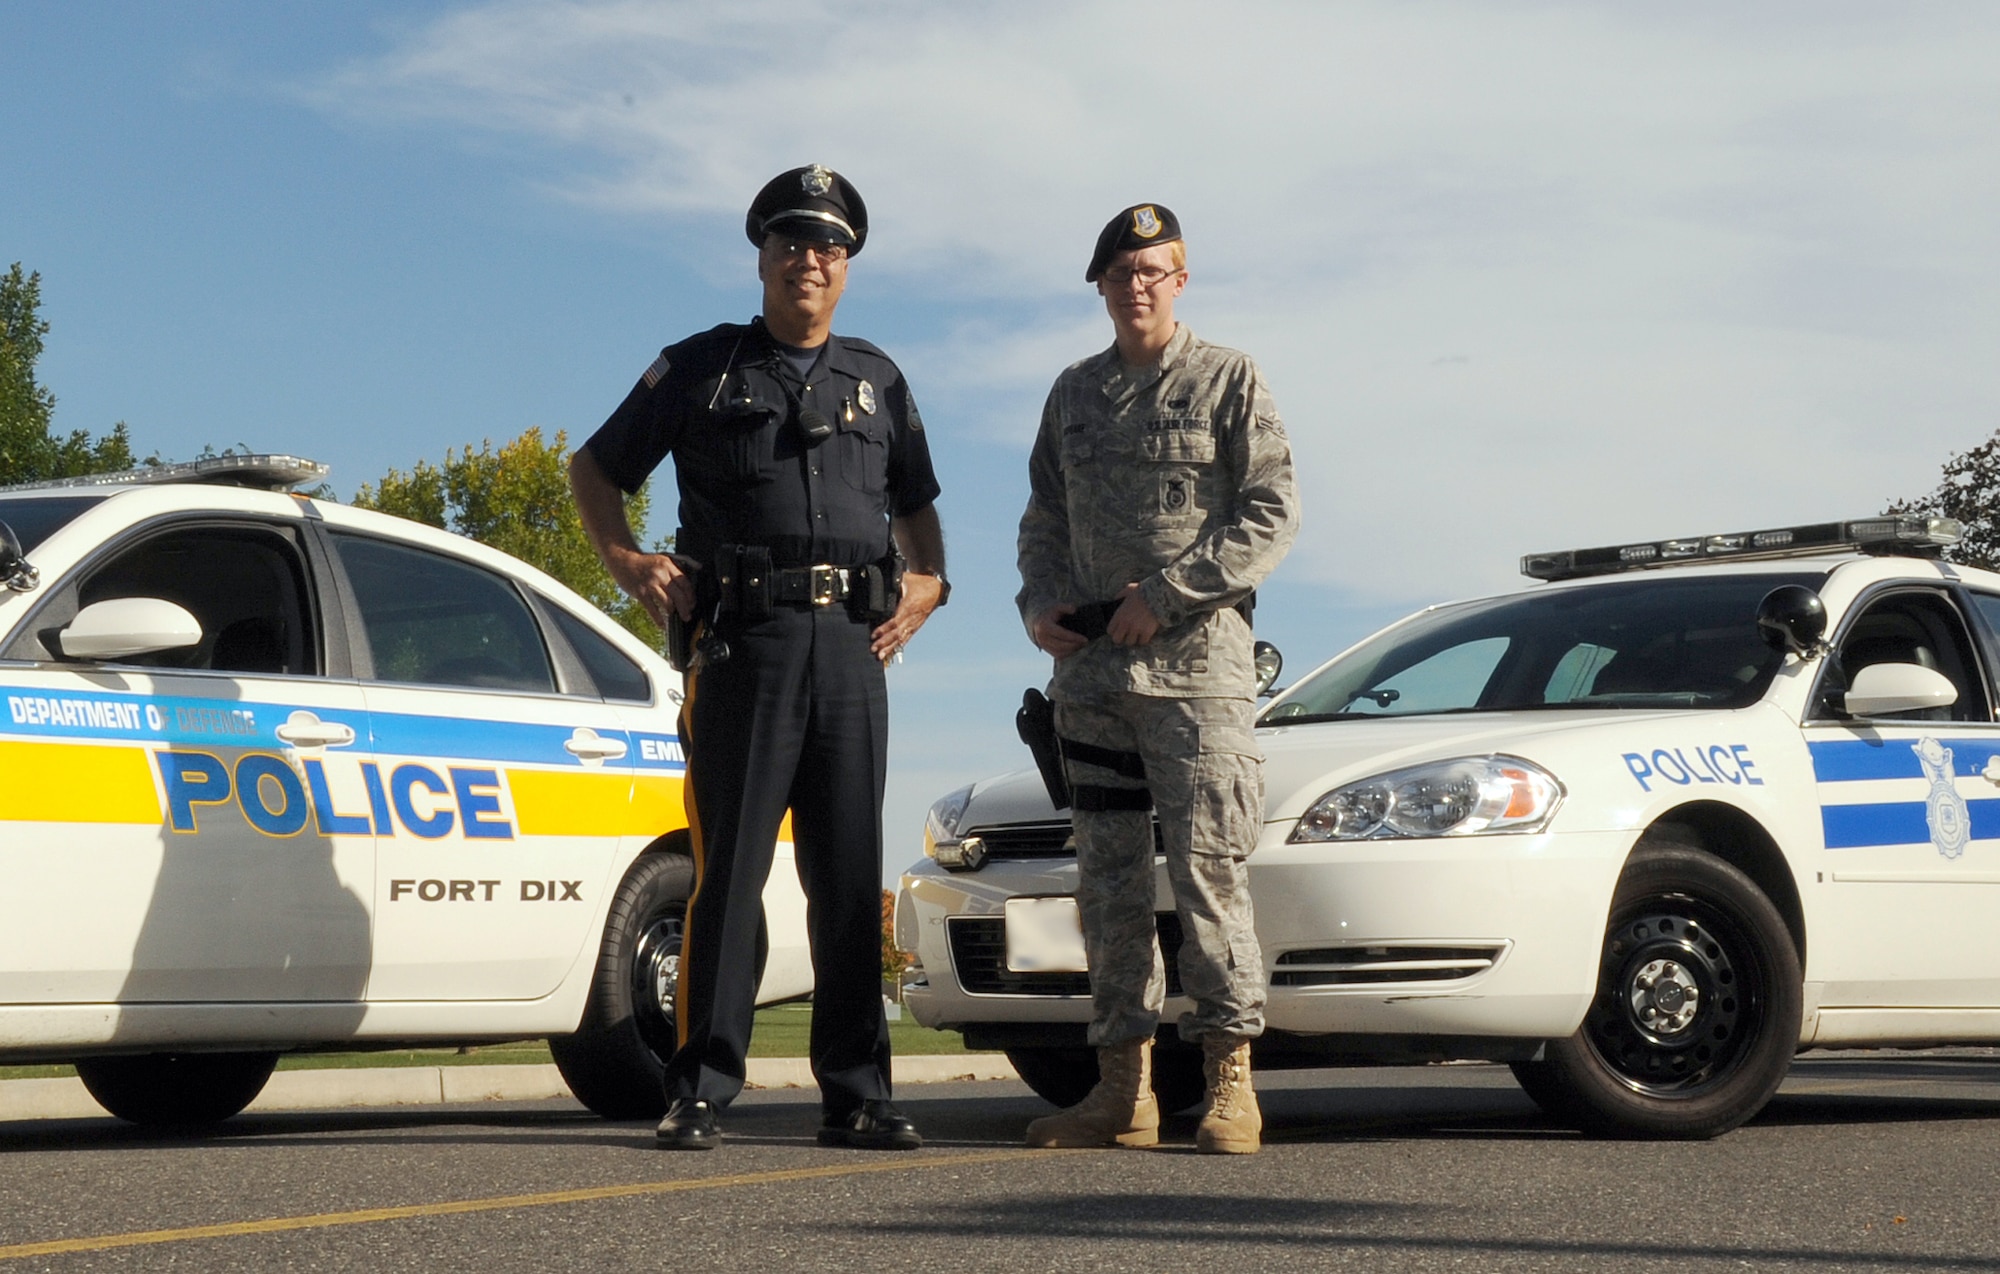 Randall Calderon Sr., a Department of Defense police patrolman at Fort Dix, N.J., and Airman 1st Class Alexander McPeake, an 87th Security Forces Squadron patrolman at McGuire Air Force Base, N.J., work together to ensure the safety and security of Joint Base McGuire-Dix-Lakehurst, N.J. (U.S. Air Force photo illustration/Staff Sgt. Danielle Johnson)